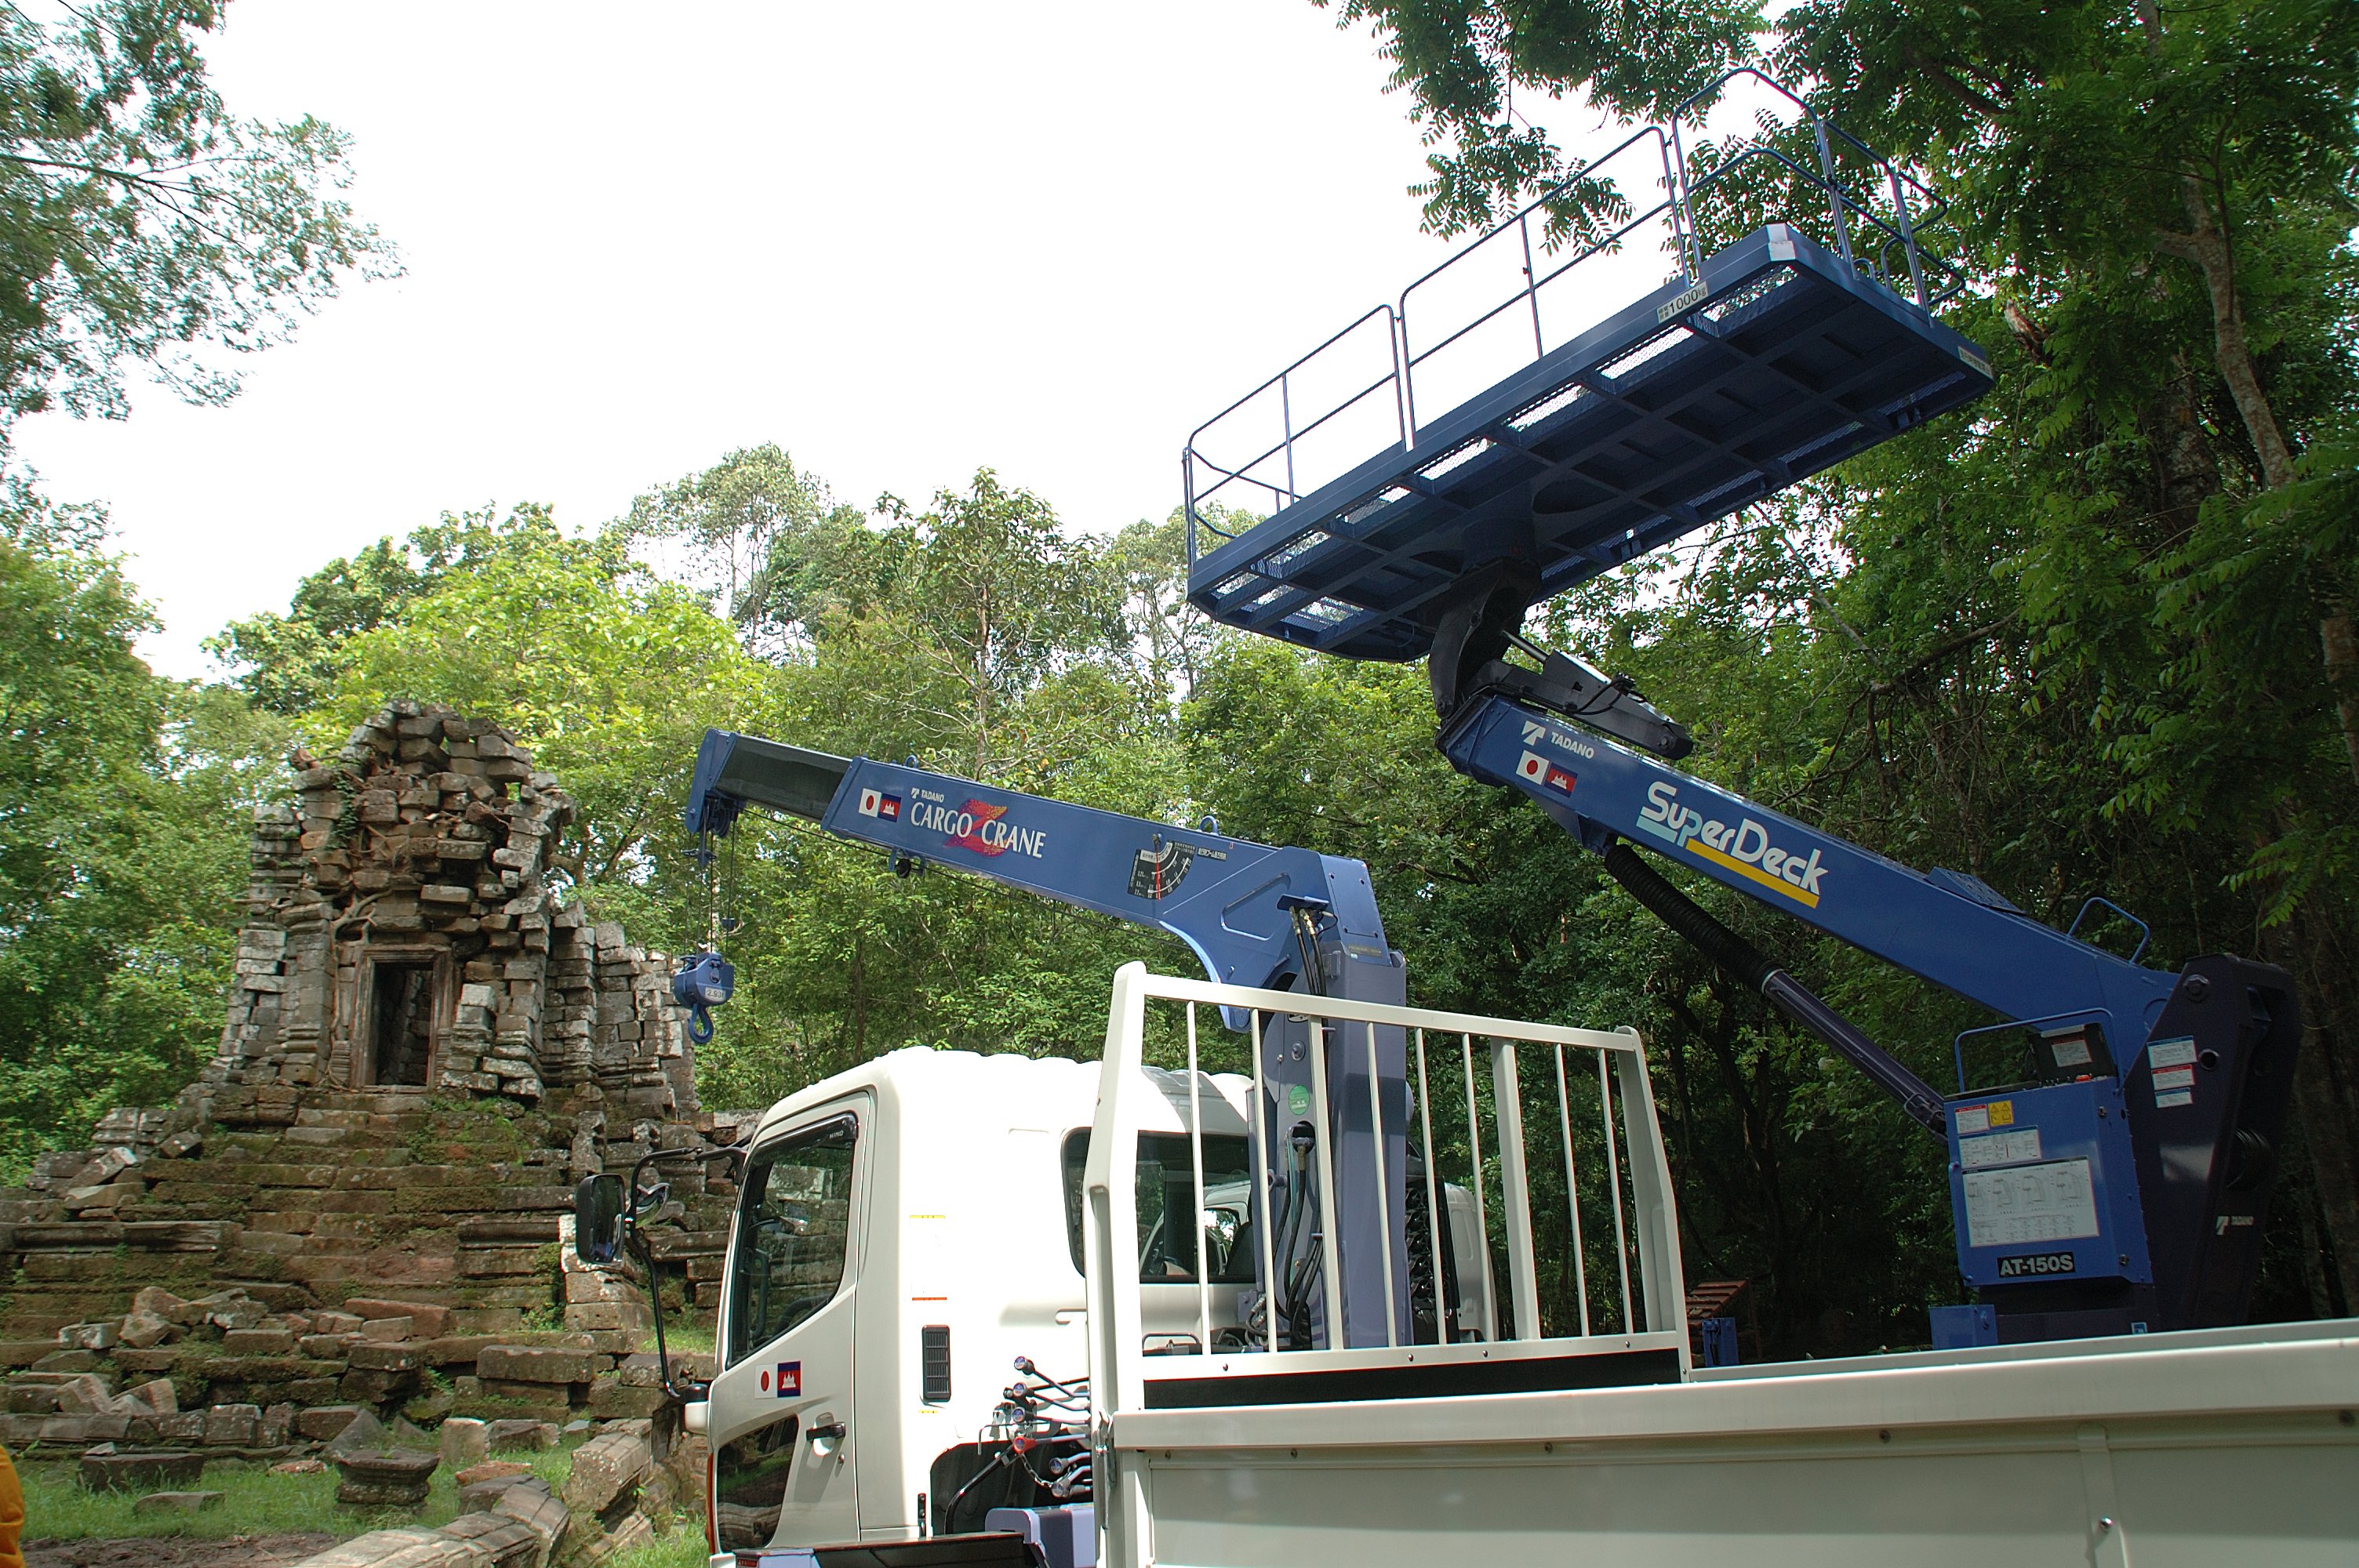 Equipment donated for the restoration of Angkor, Cambodia